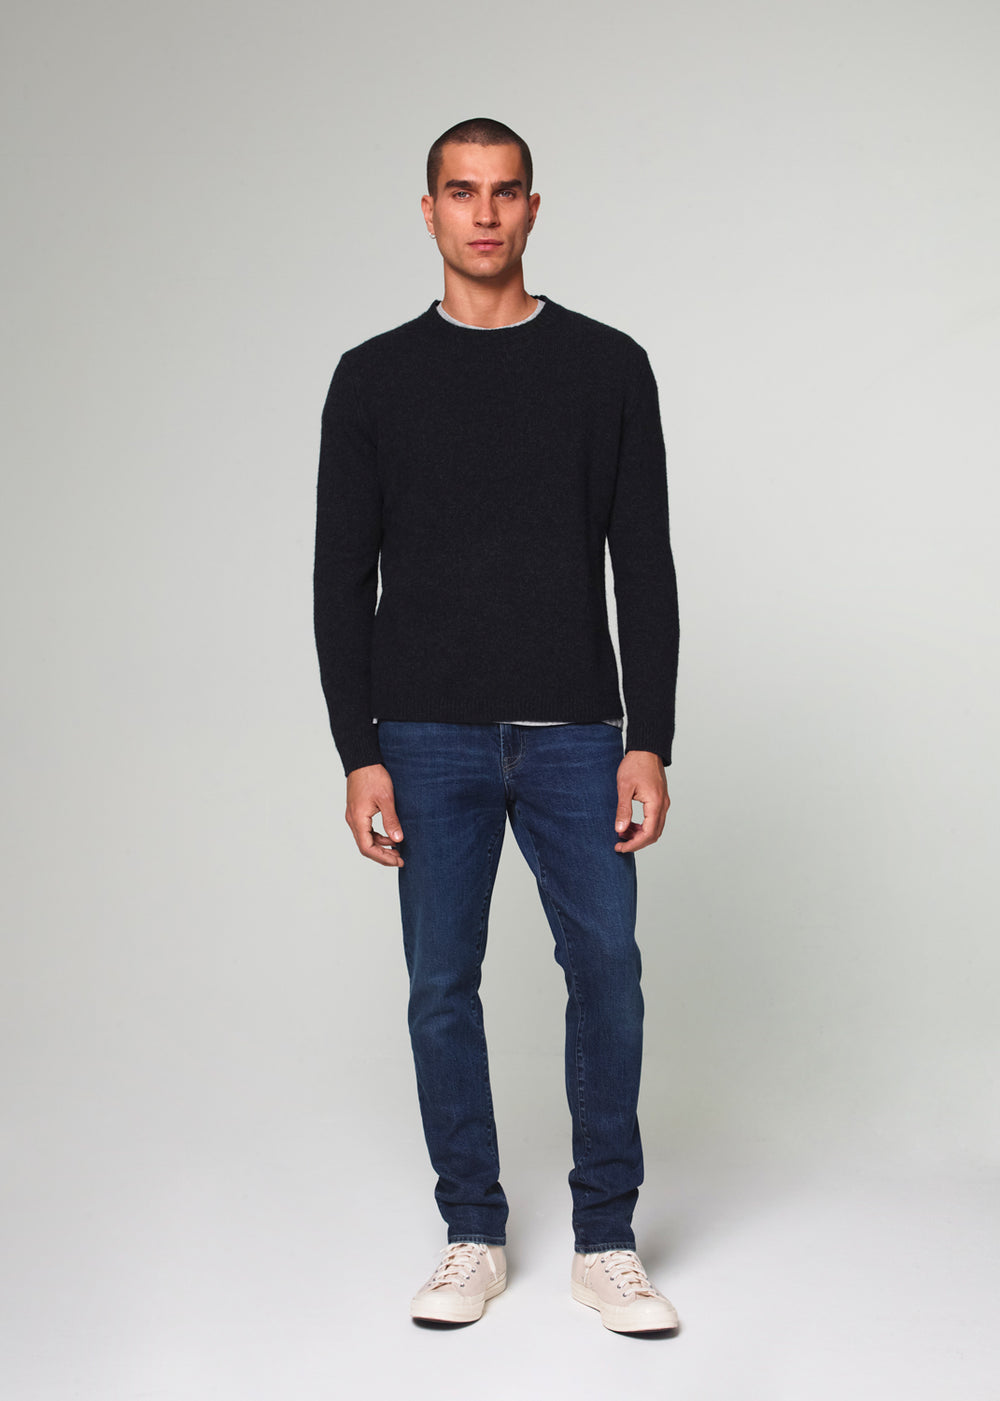 How To Buy Men's Jeans That Fit - Understanding Denim - Waist - Rise -  Inseam - Style - Boot Cut 